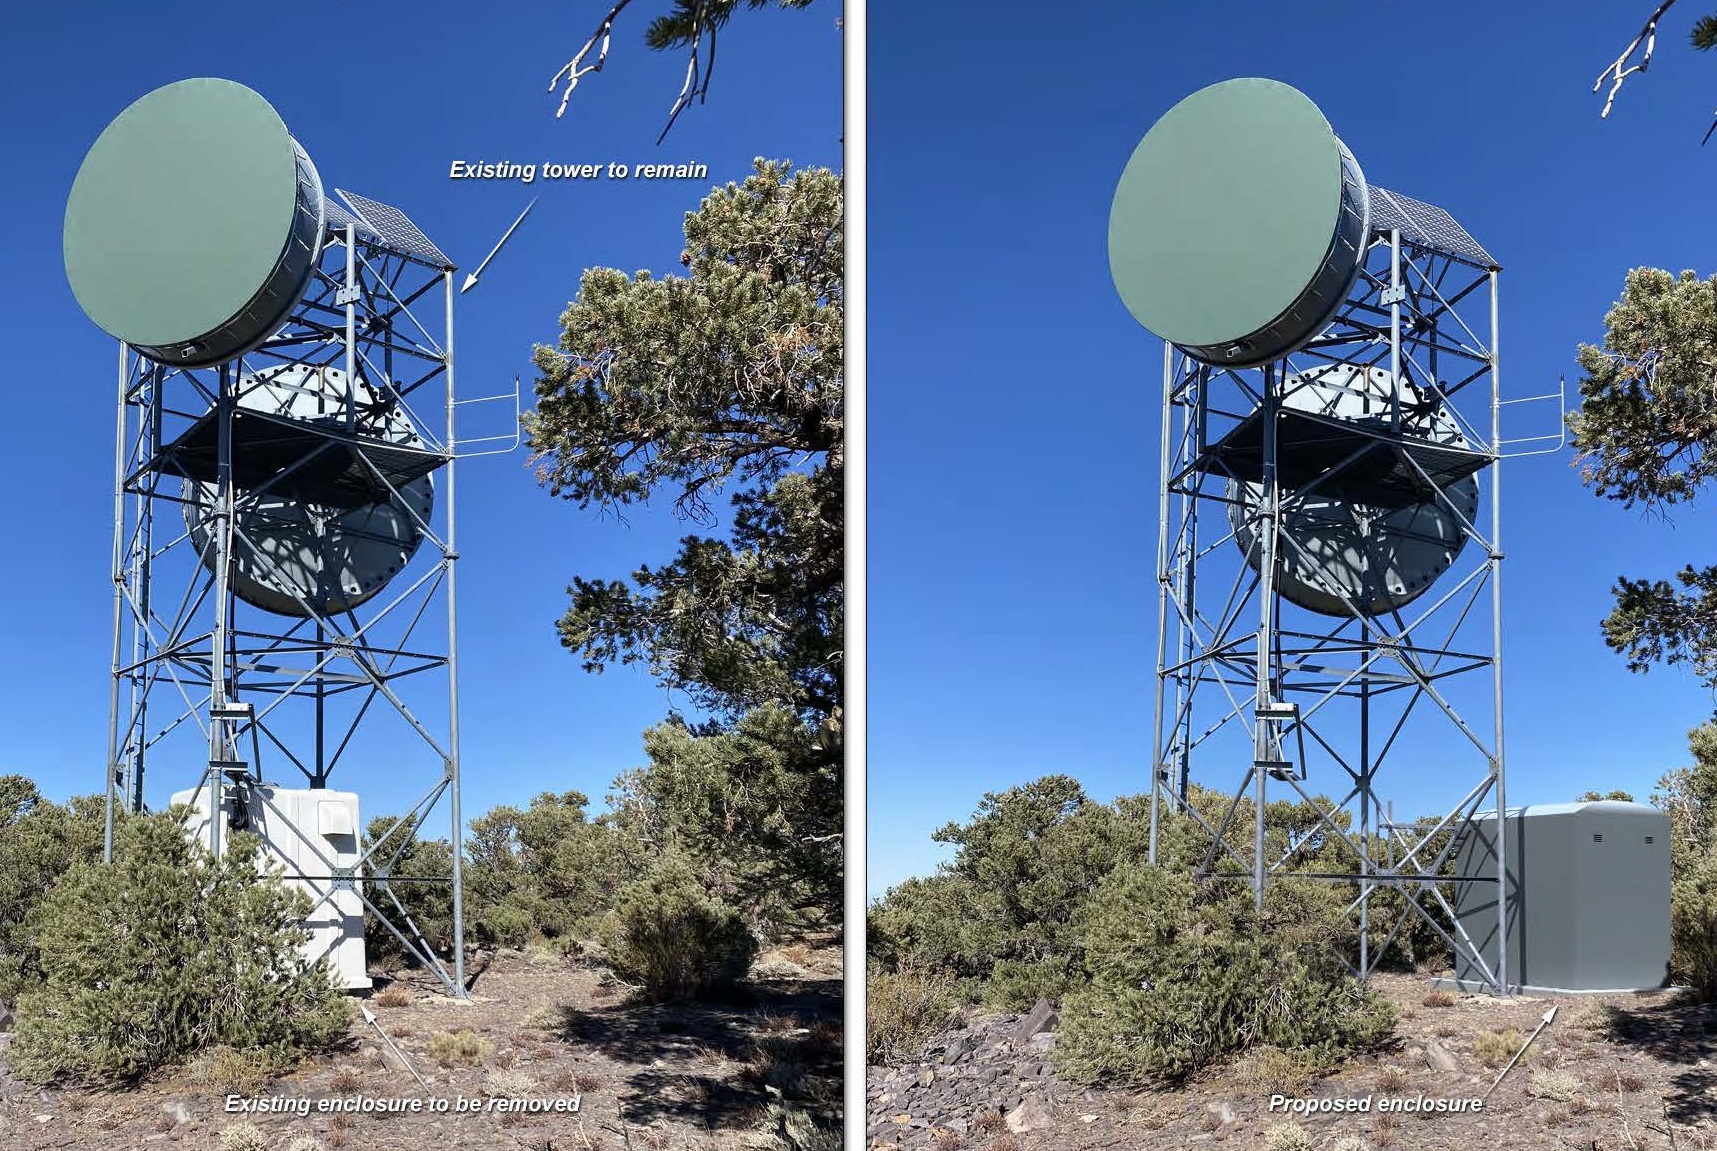 The photograph on the left shows the existing 35-foot-tall tower. The simulation on the right shows the proposed new battery and equipment shed to the right of the existing tower.